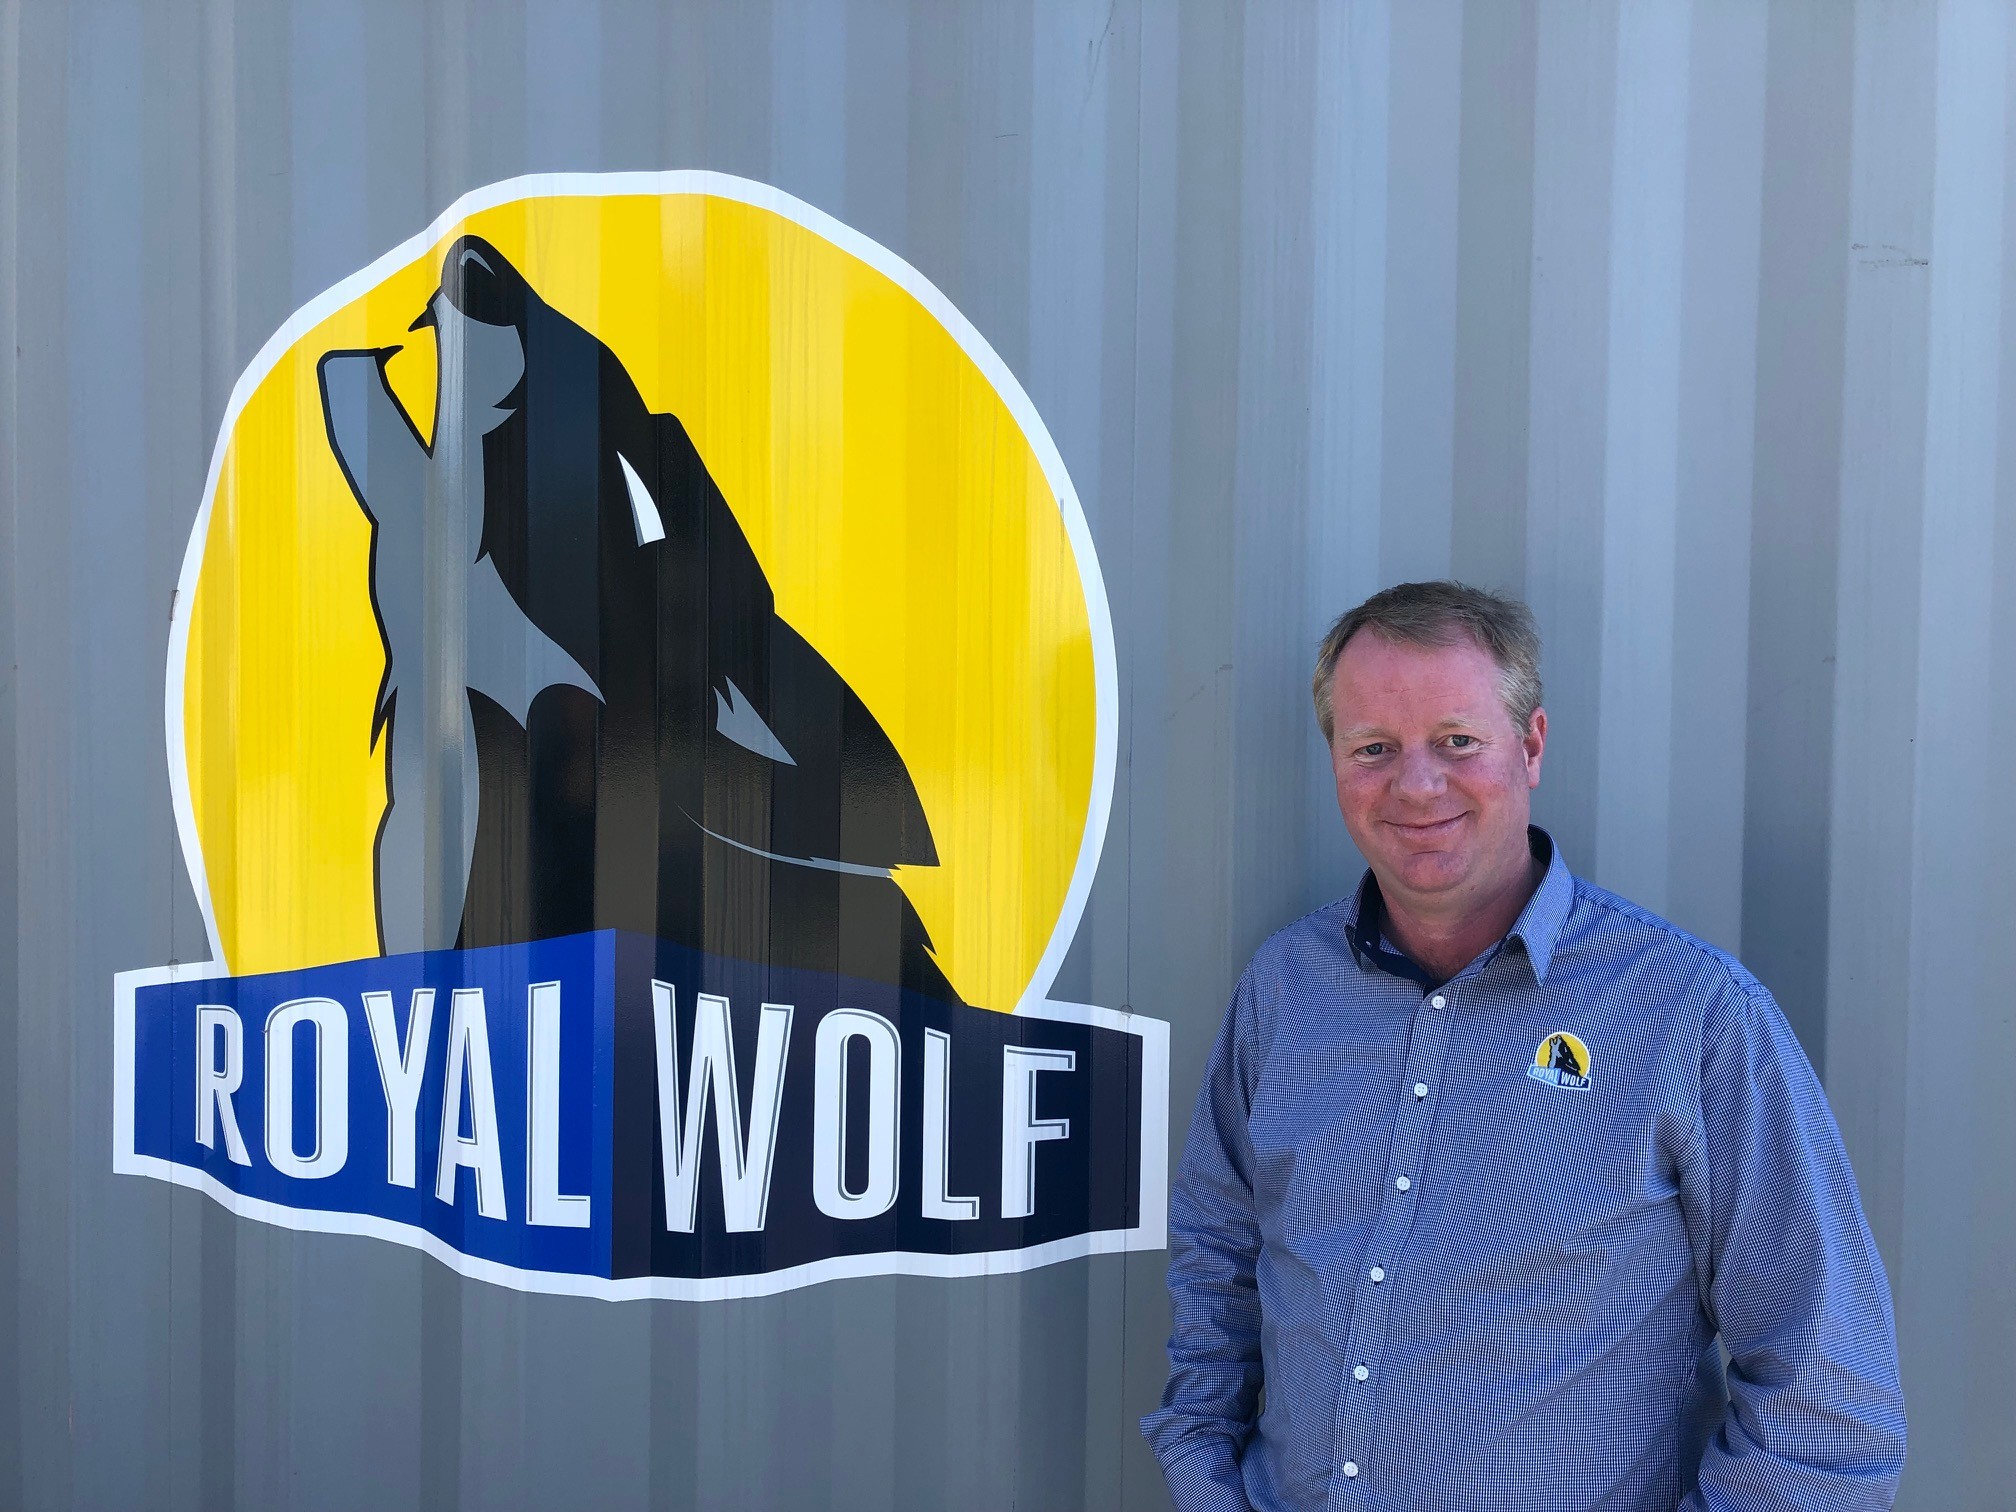 Born and bred local, David Grieve, who has relocated back to the area after a stint in Australia, is managing our new faciltiy in Cromwell.